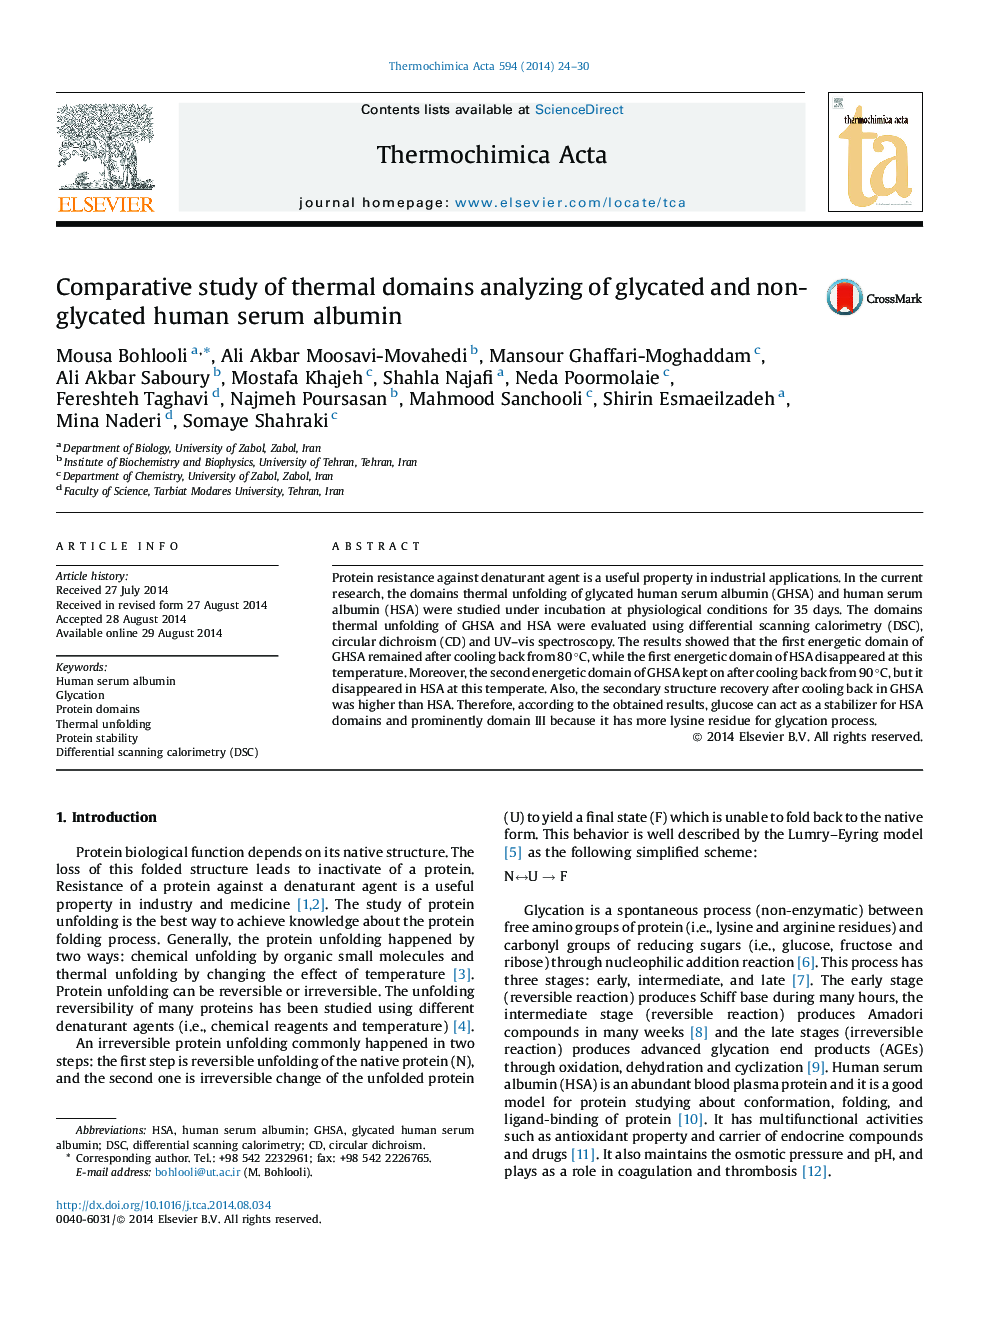 Comparative study of thermal domains analyzing of glycated and non-glycated human serum albumin